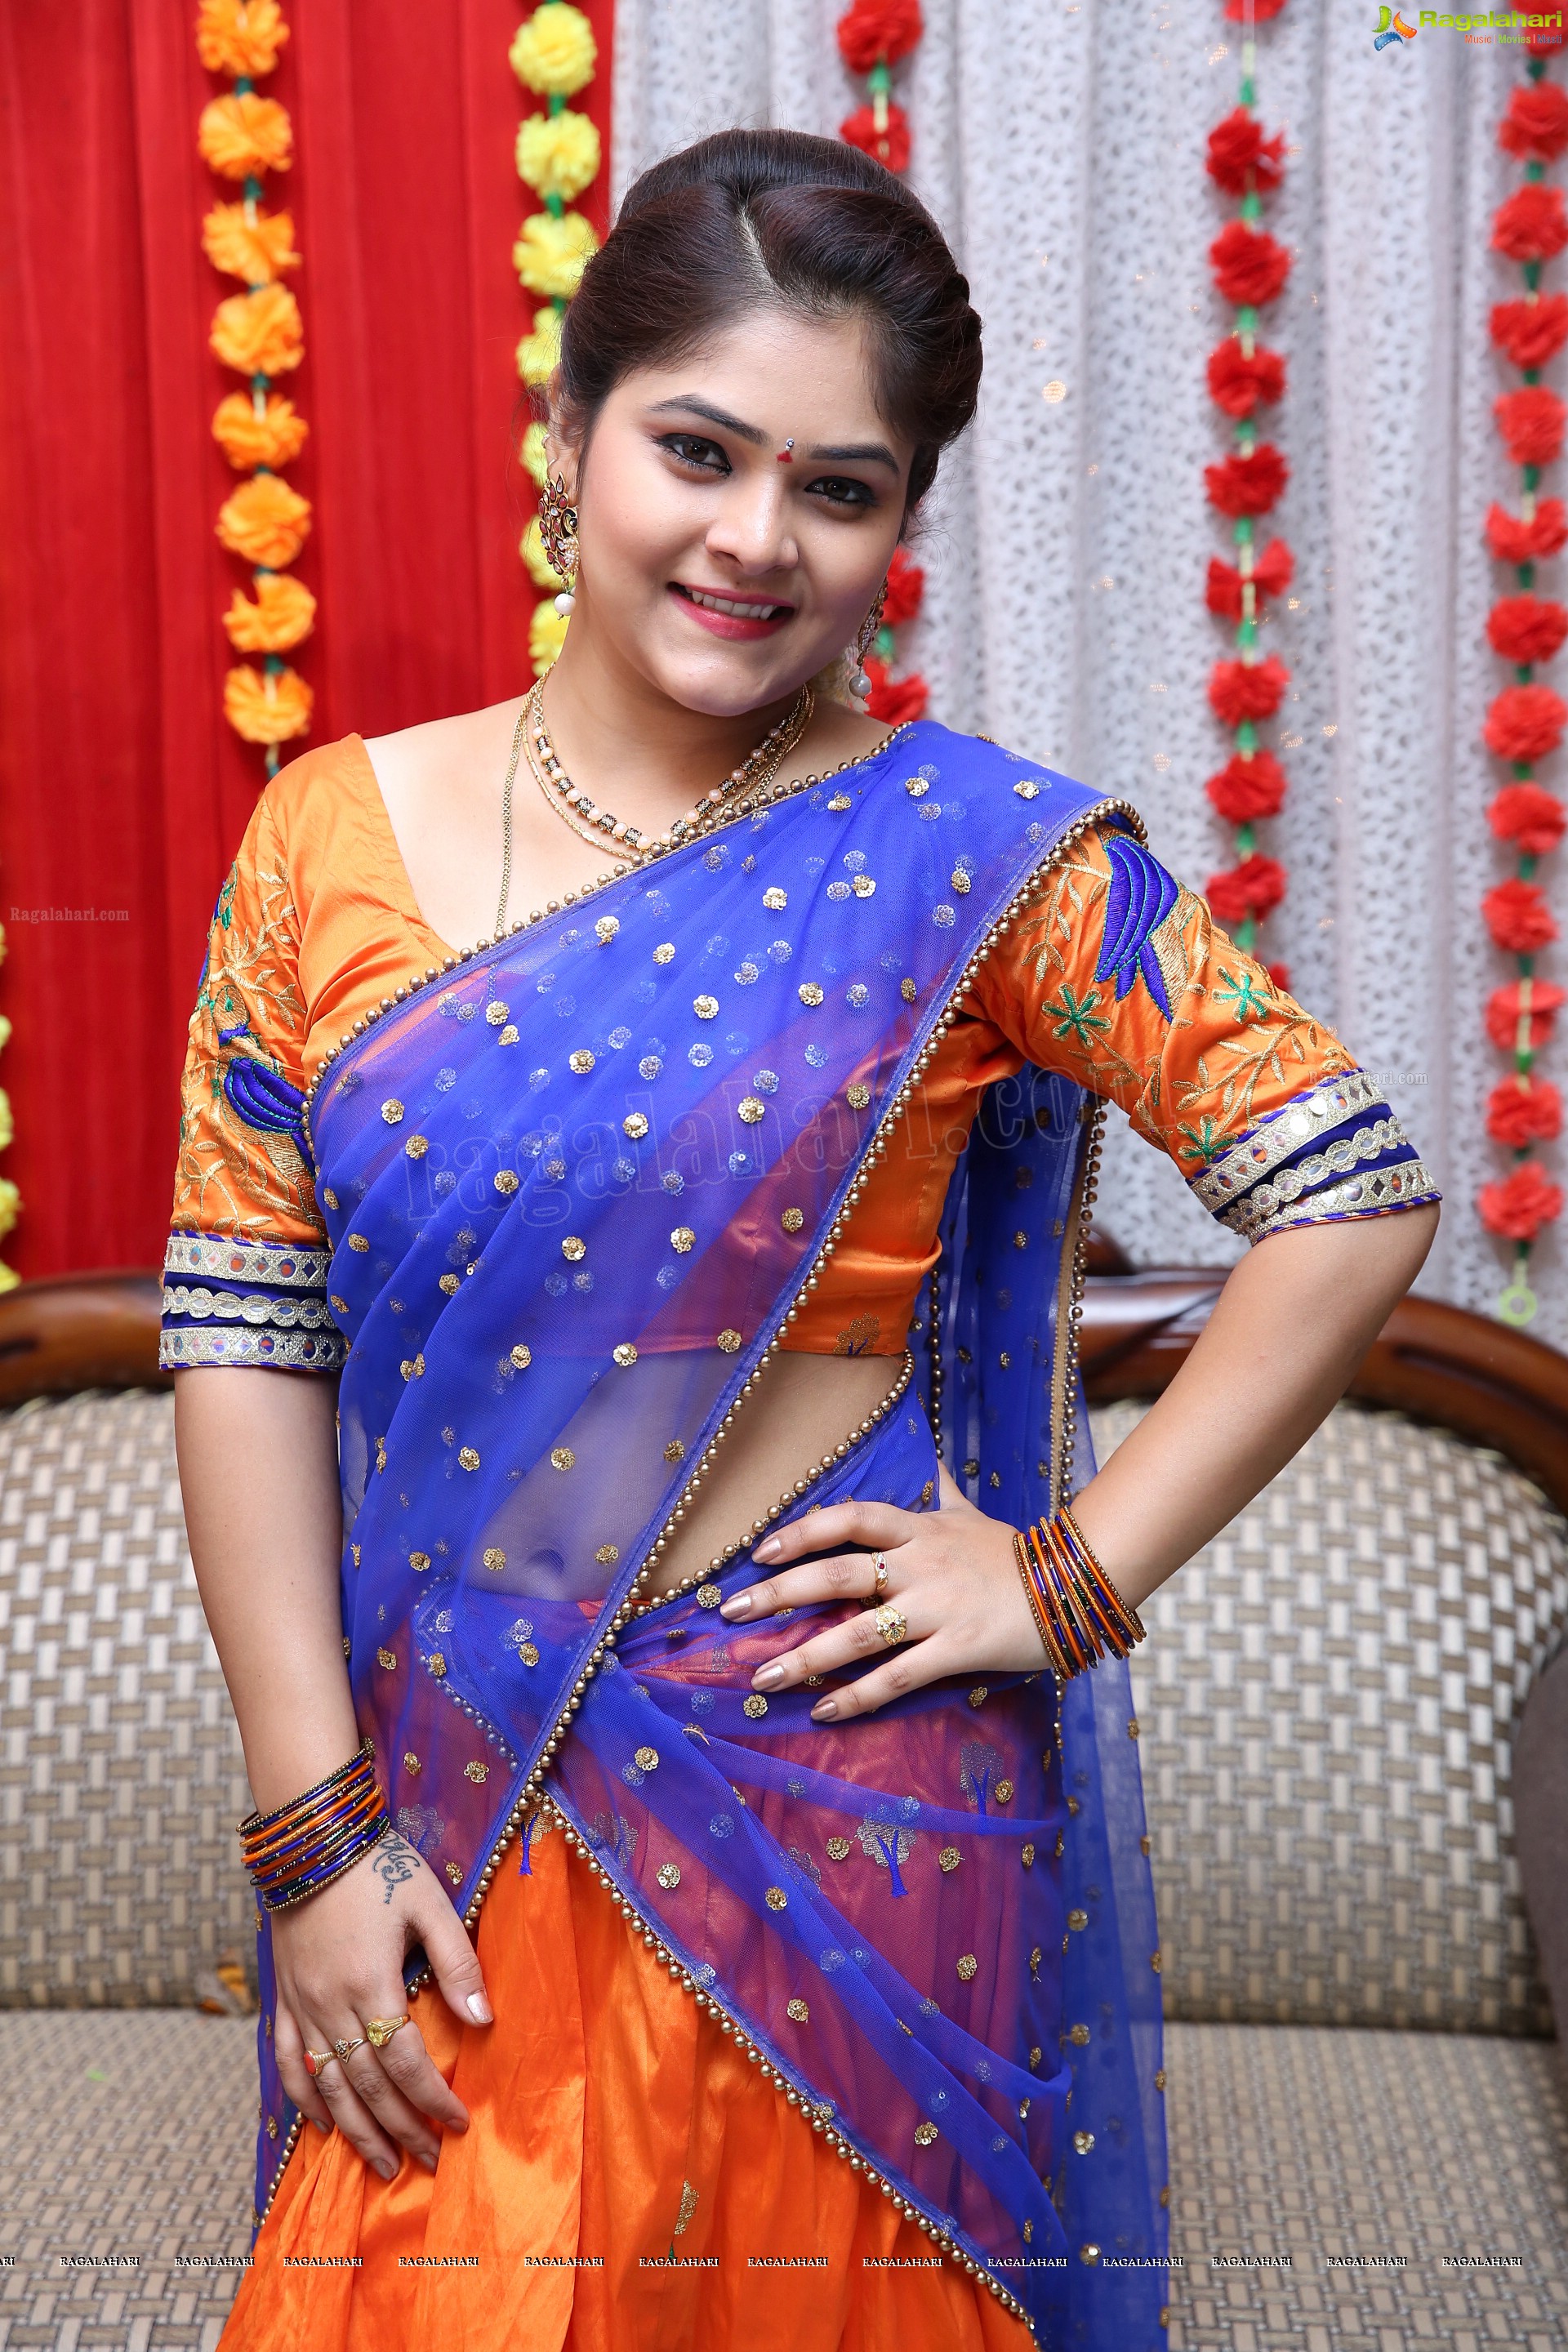 Haritha From the Sets of Agnisakshi Telugu Serial